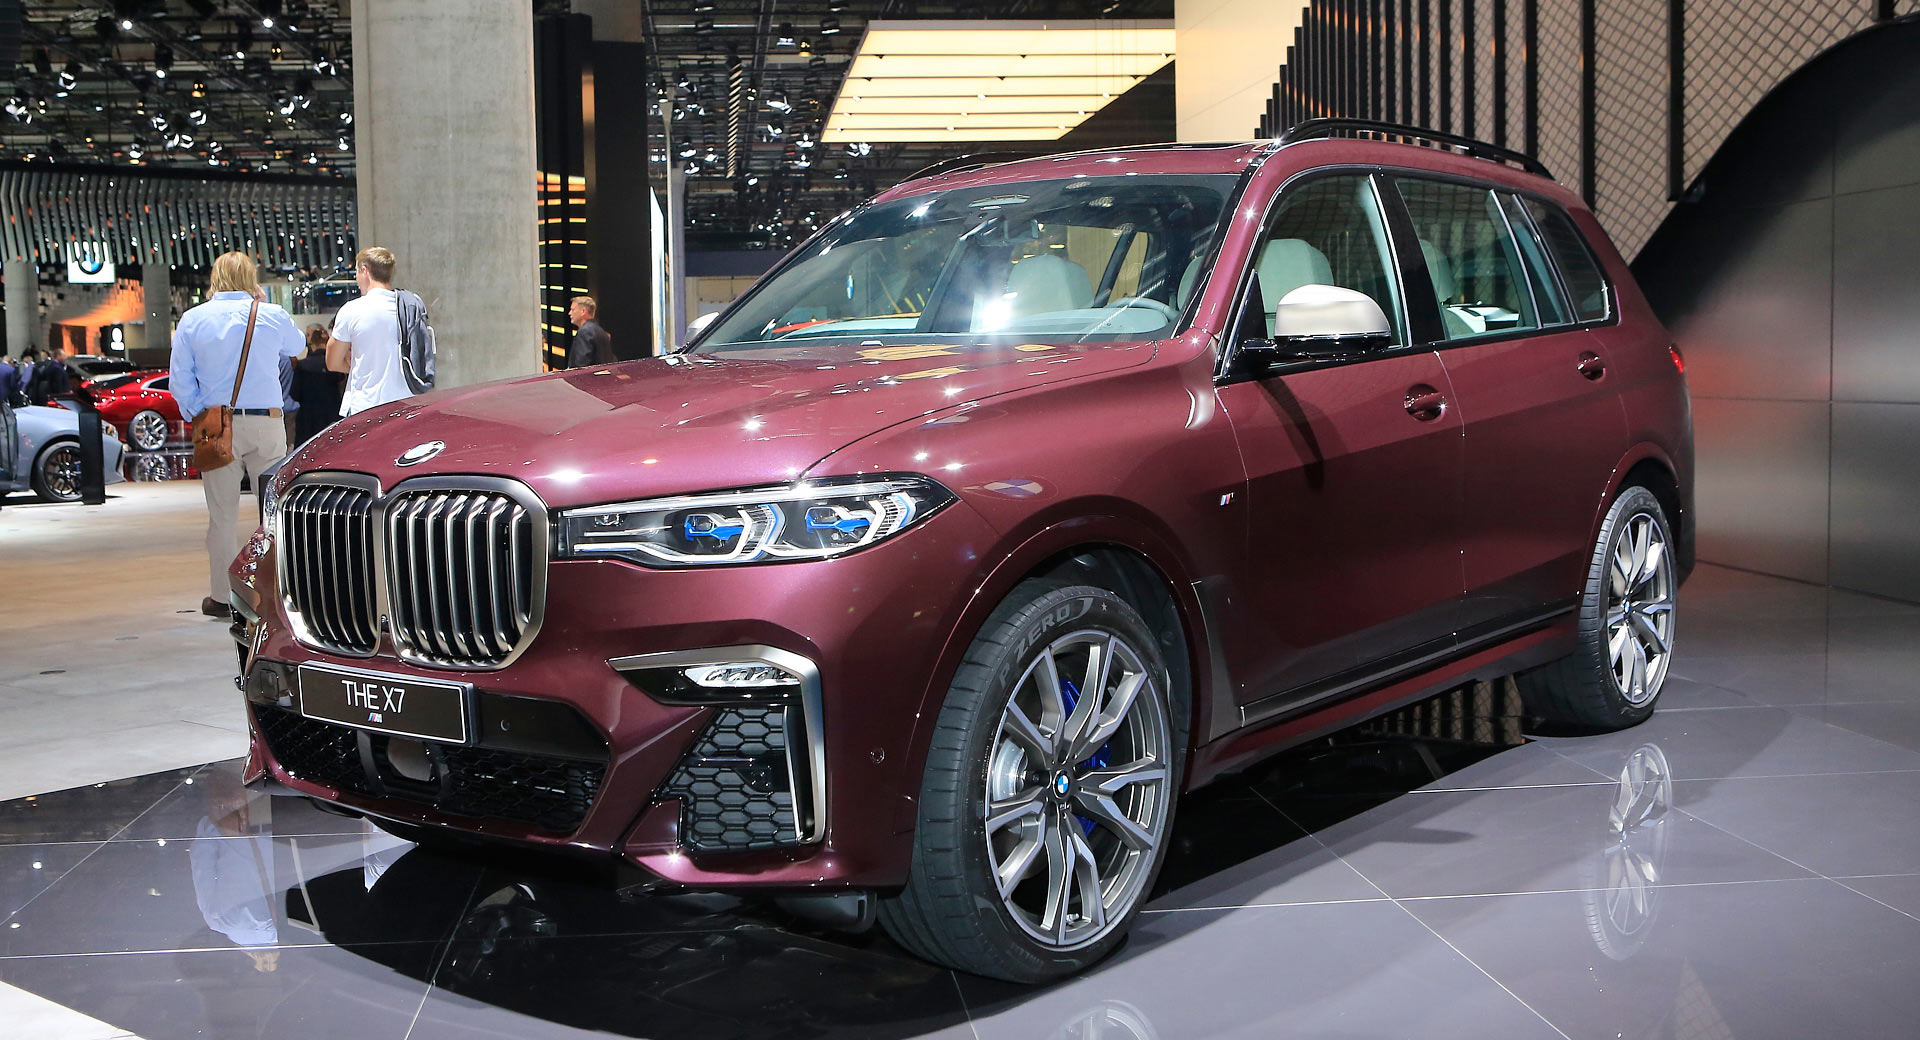 BMW X7 M50i Is Germany's Idea Of What Americans Want Their X-Large SUV